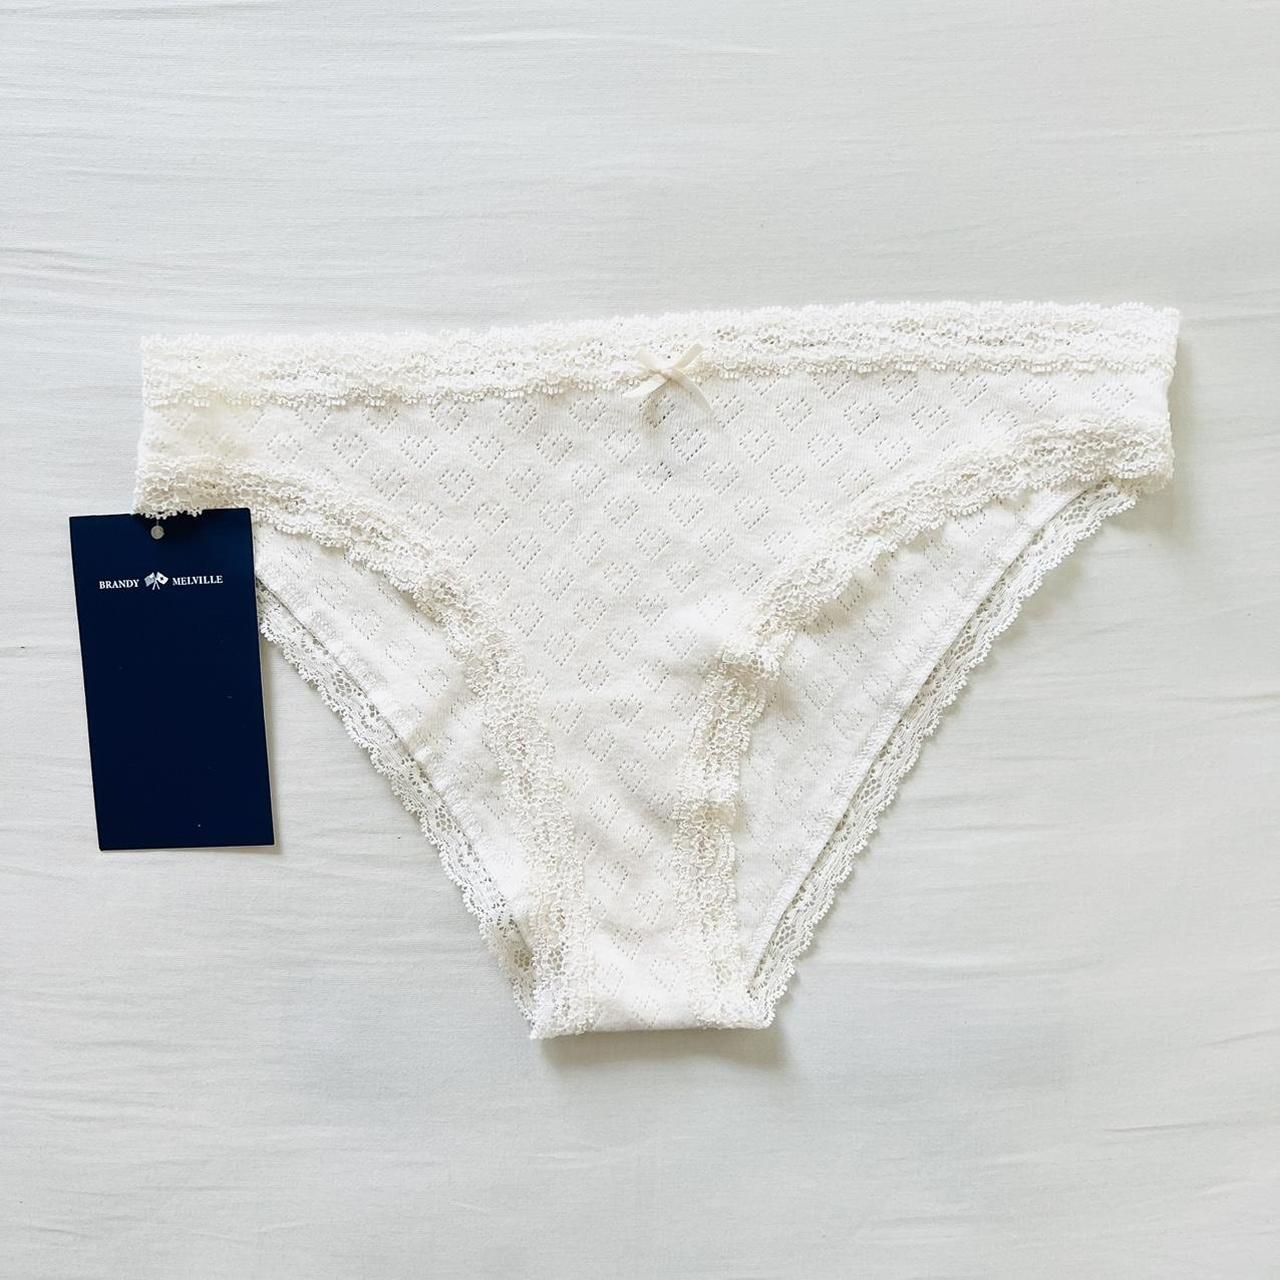 Intimates, Brandy Melville Womens Heart Lace Underwear White With Red  Hearts